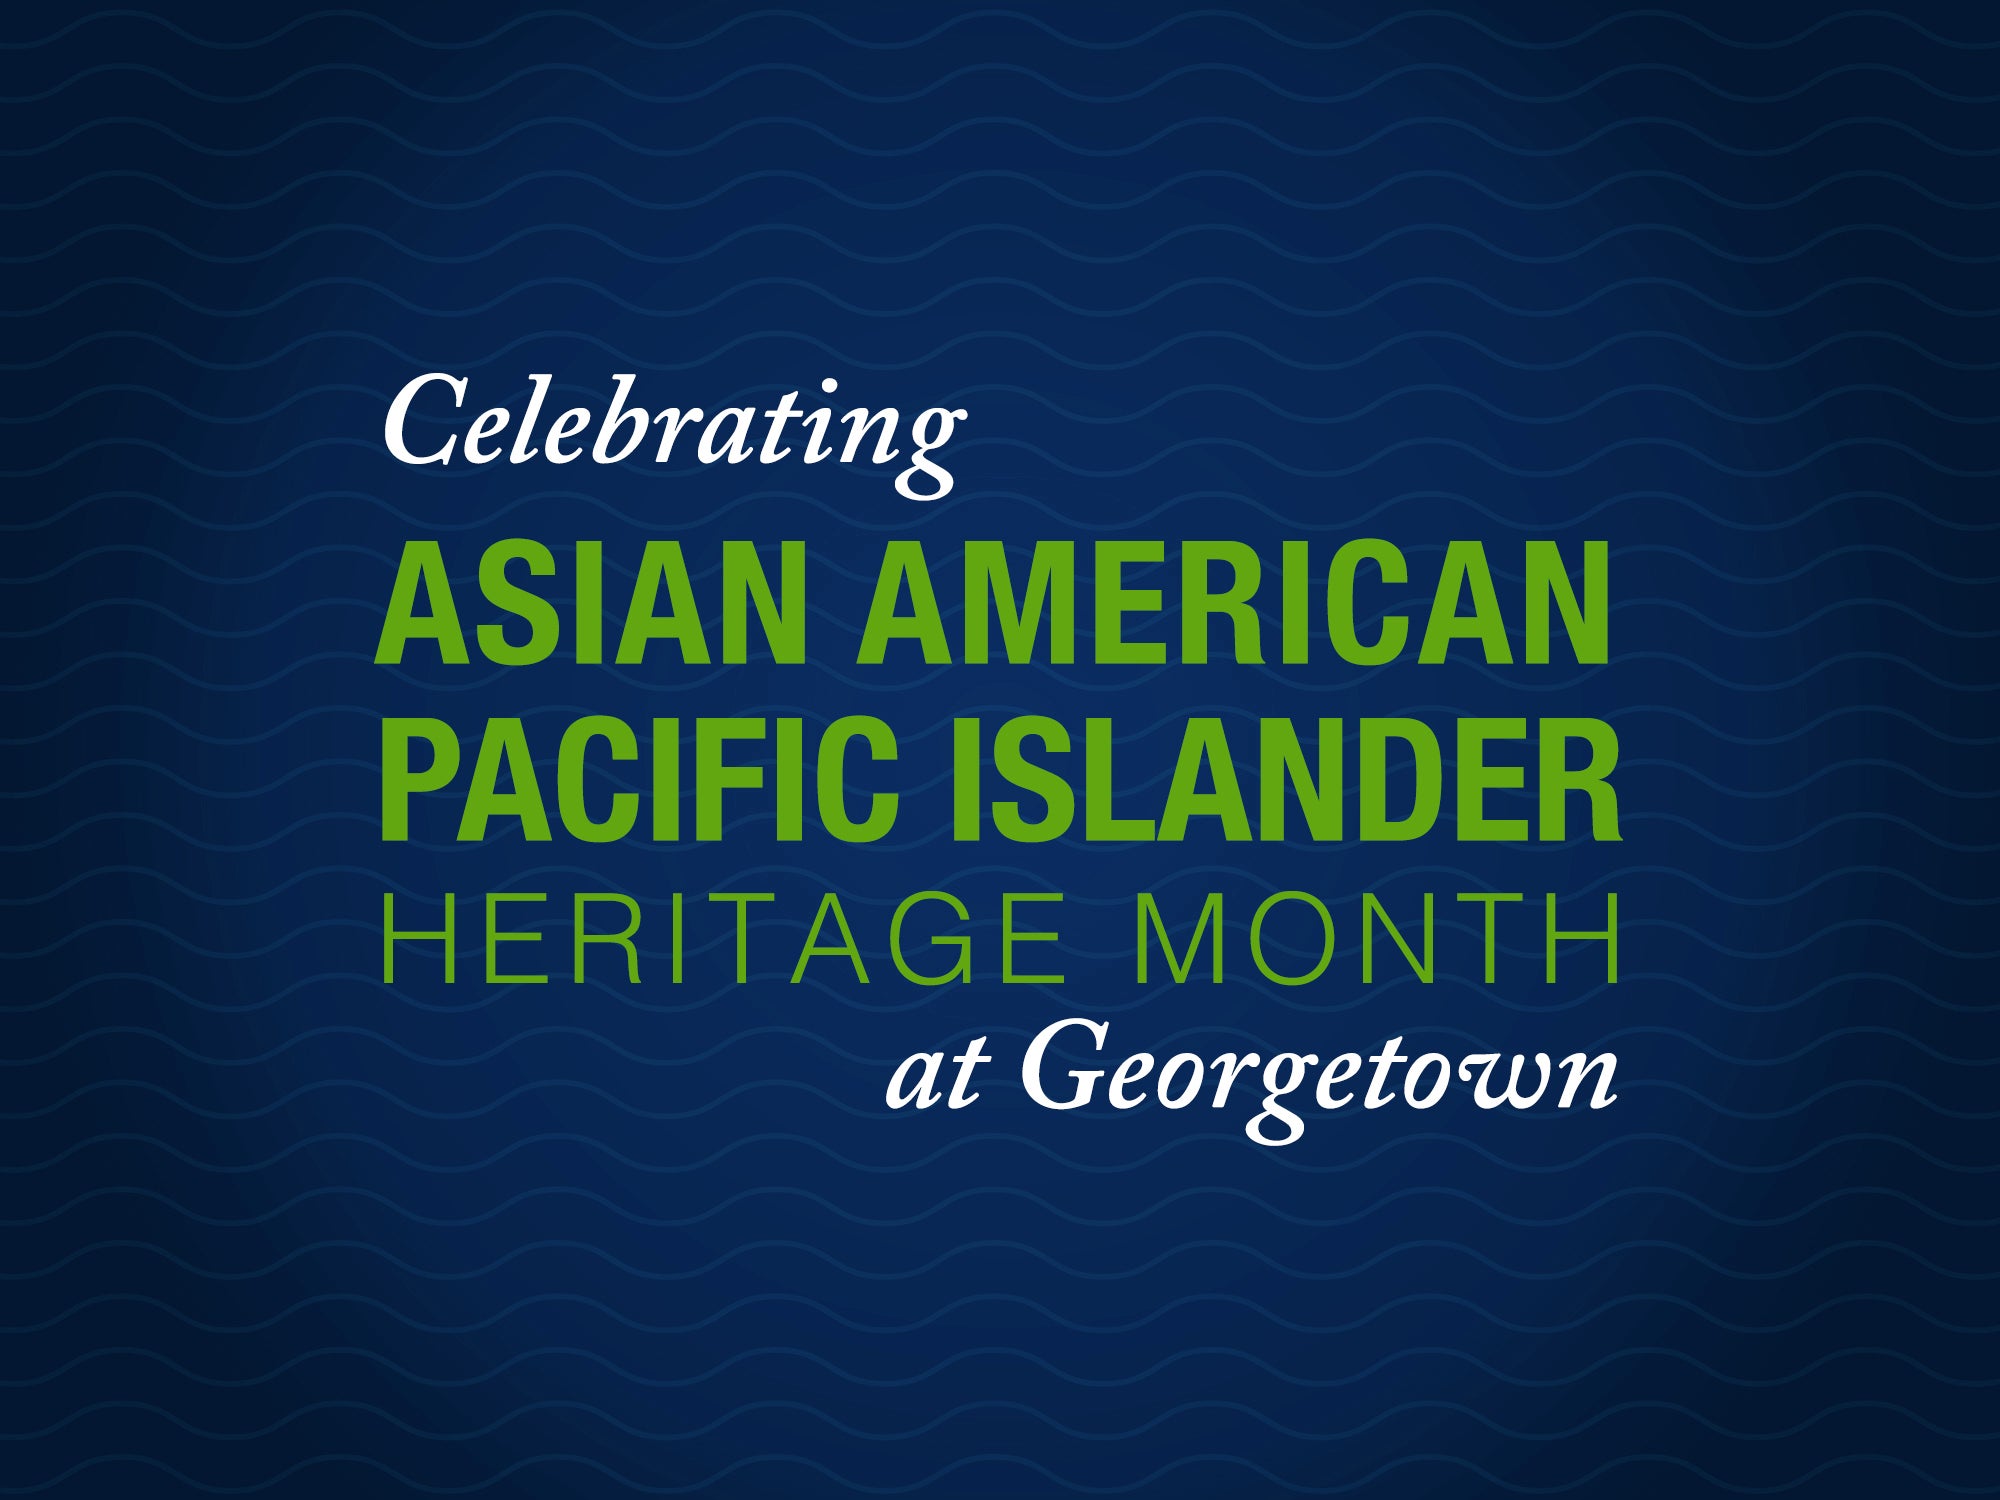 Graphic with the text "Celebrating Asian American Pacific Islander Heritage Month at Georgetown"